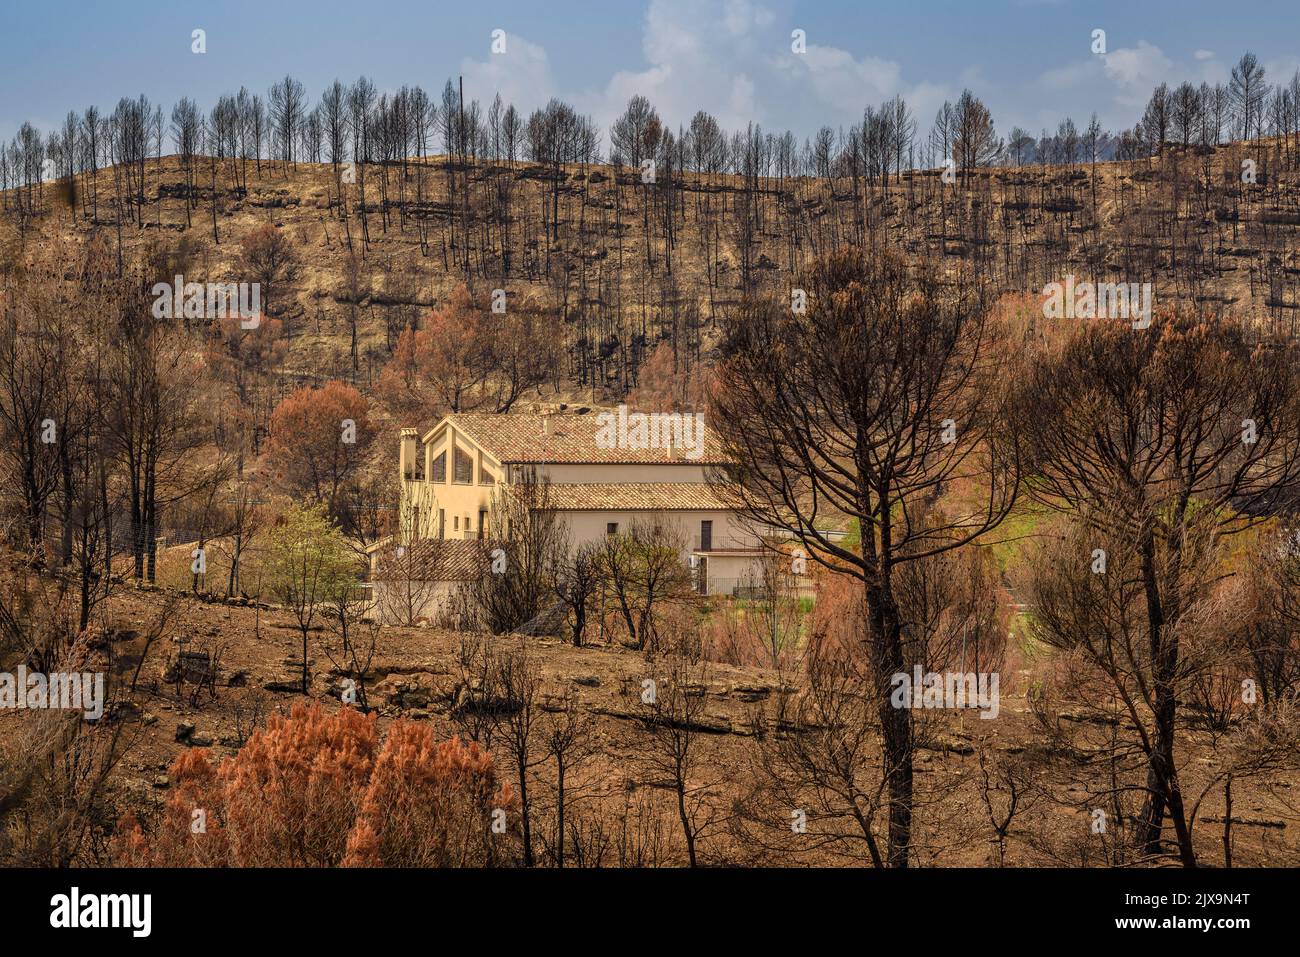 A house surrounded by forest burned after the 2022 Pont de Vilomara wildfire (Bages, Barcelona, Catalonia, Spain)  ESP: Una casa y bosque quemado Stock Photo